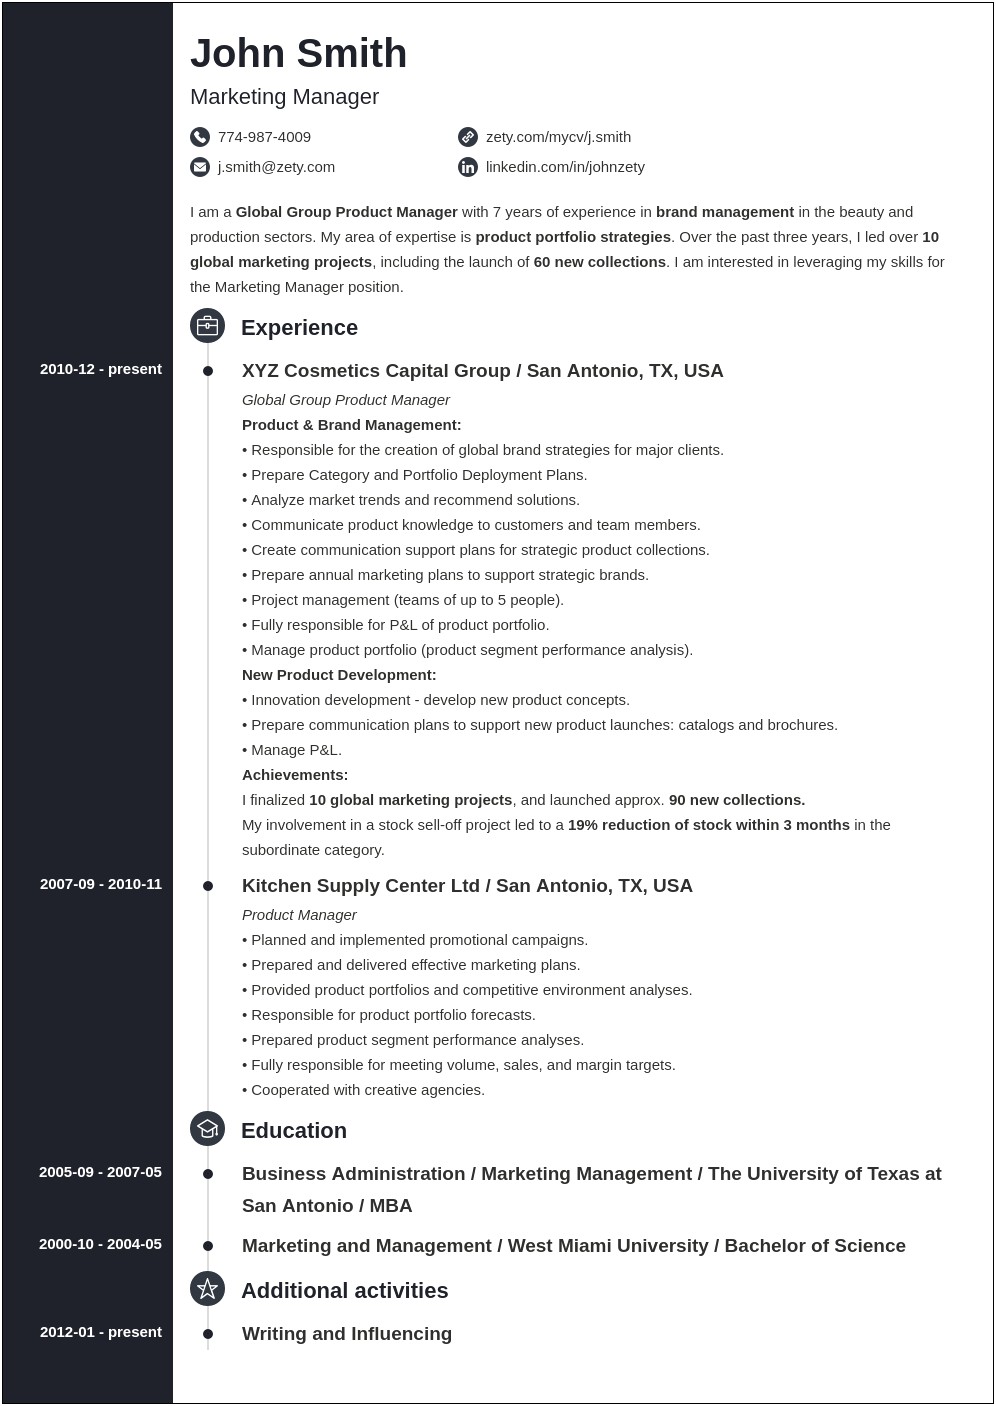 Resume Order Education Or Work Experience First